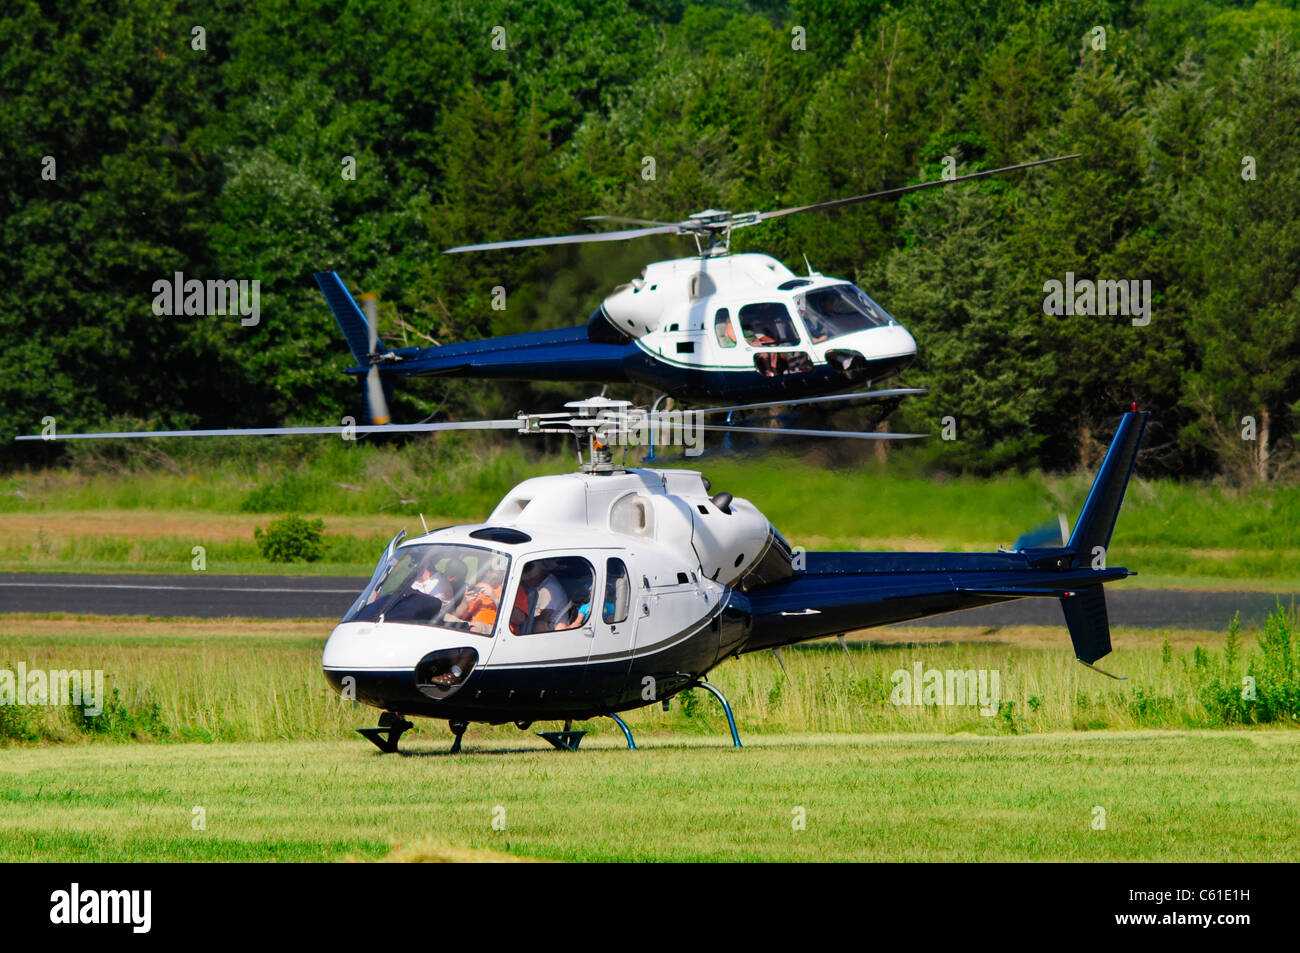 Two blue and white helicopters landing in a grass field Stock Photo